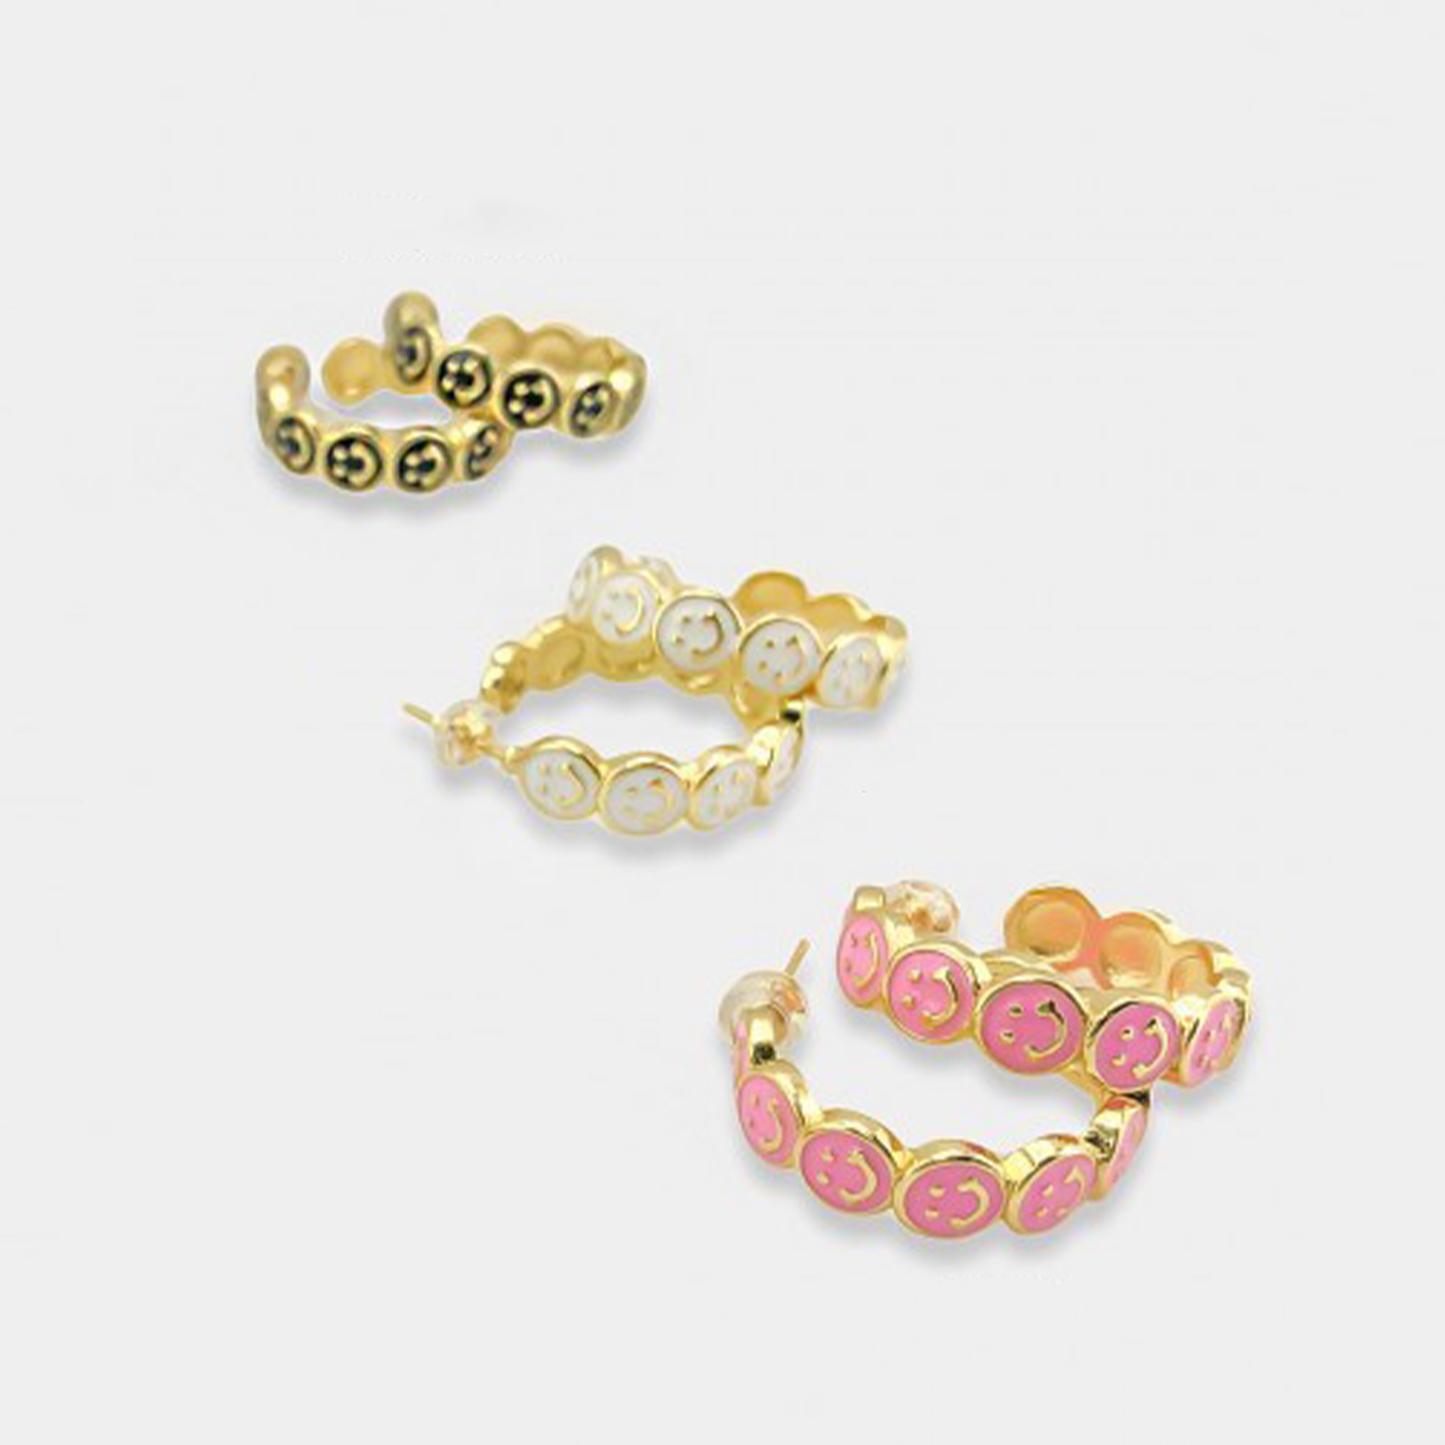 Enamel Smile Hoop. Enamel push back hoop earrings with smiley face pattern. Slide the earring post into your ears and secure it with the push back backing